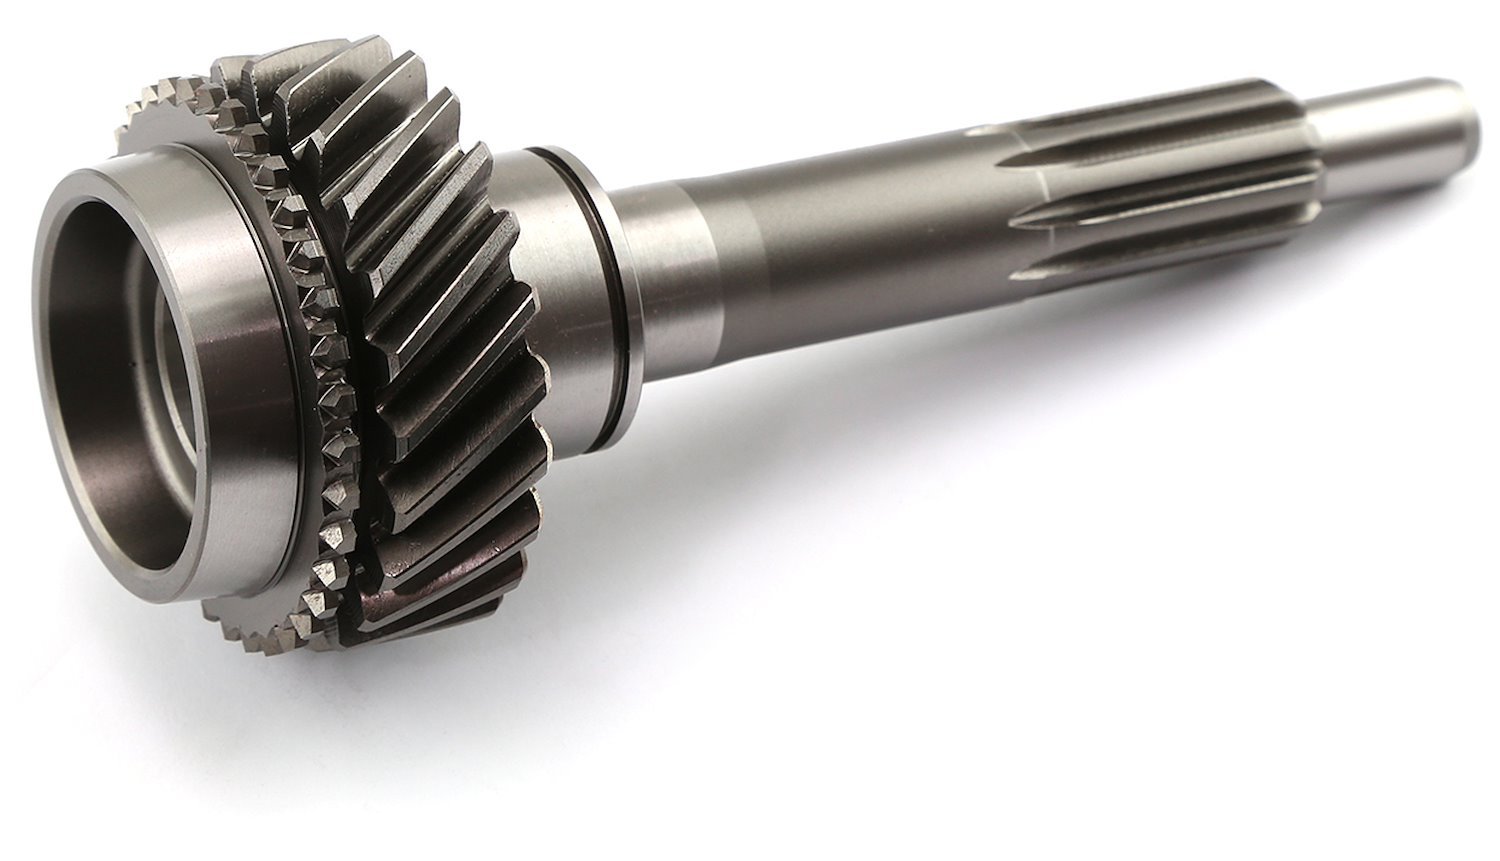 Manual Transmission Input Shaft for Ford 4-Speed Top